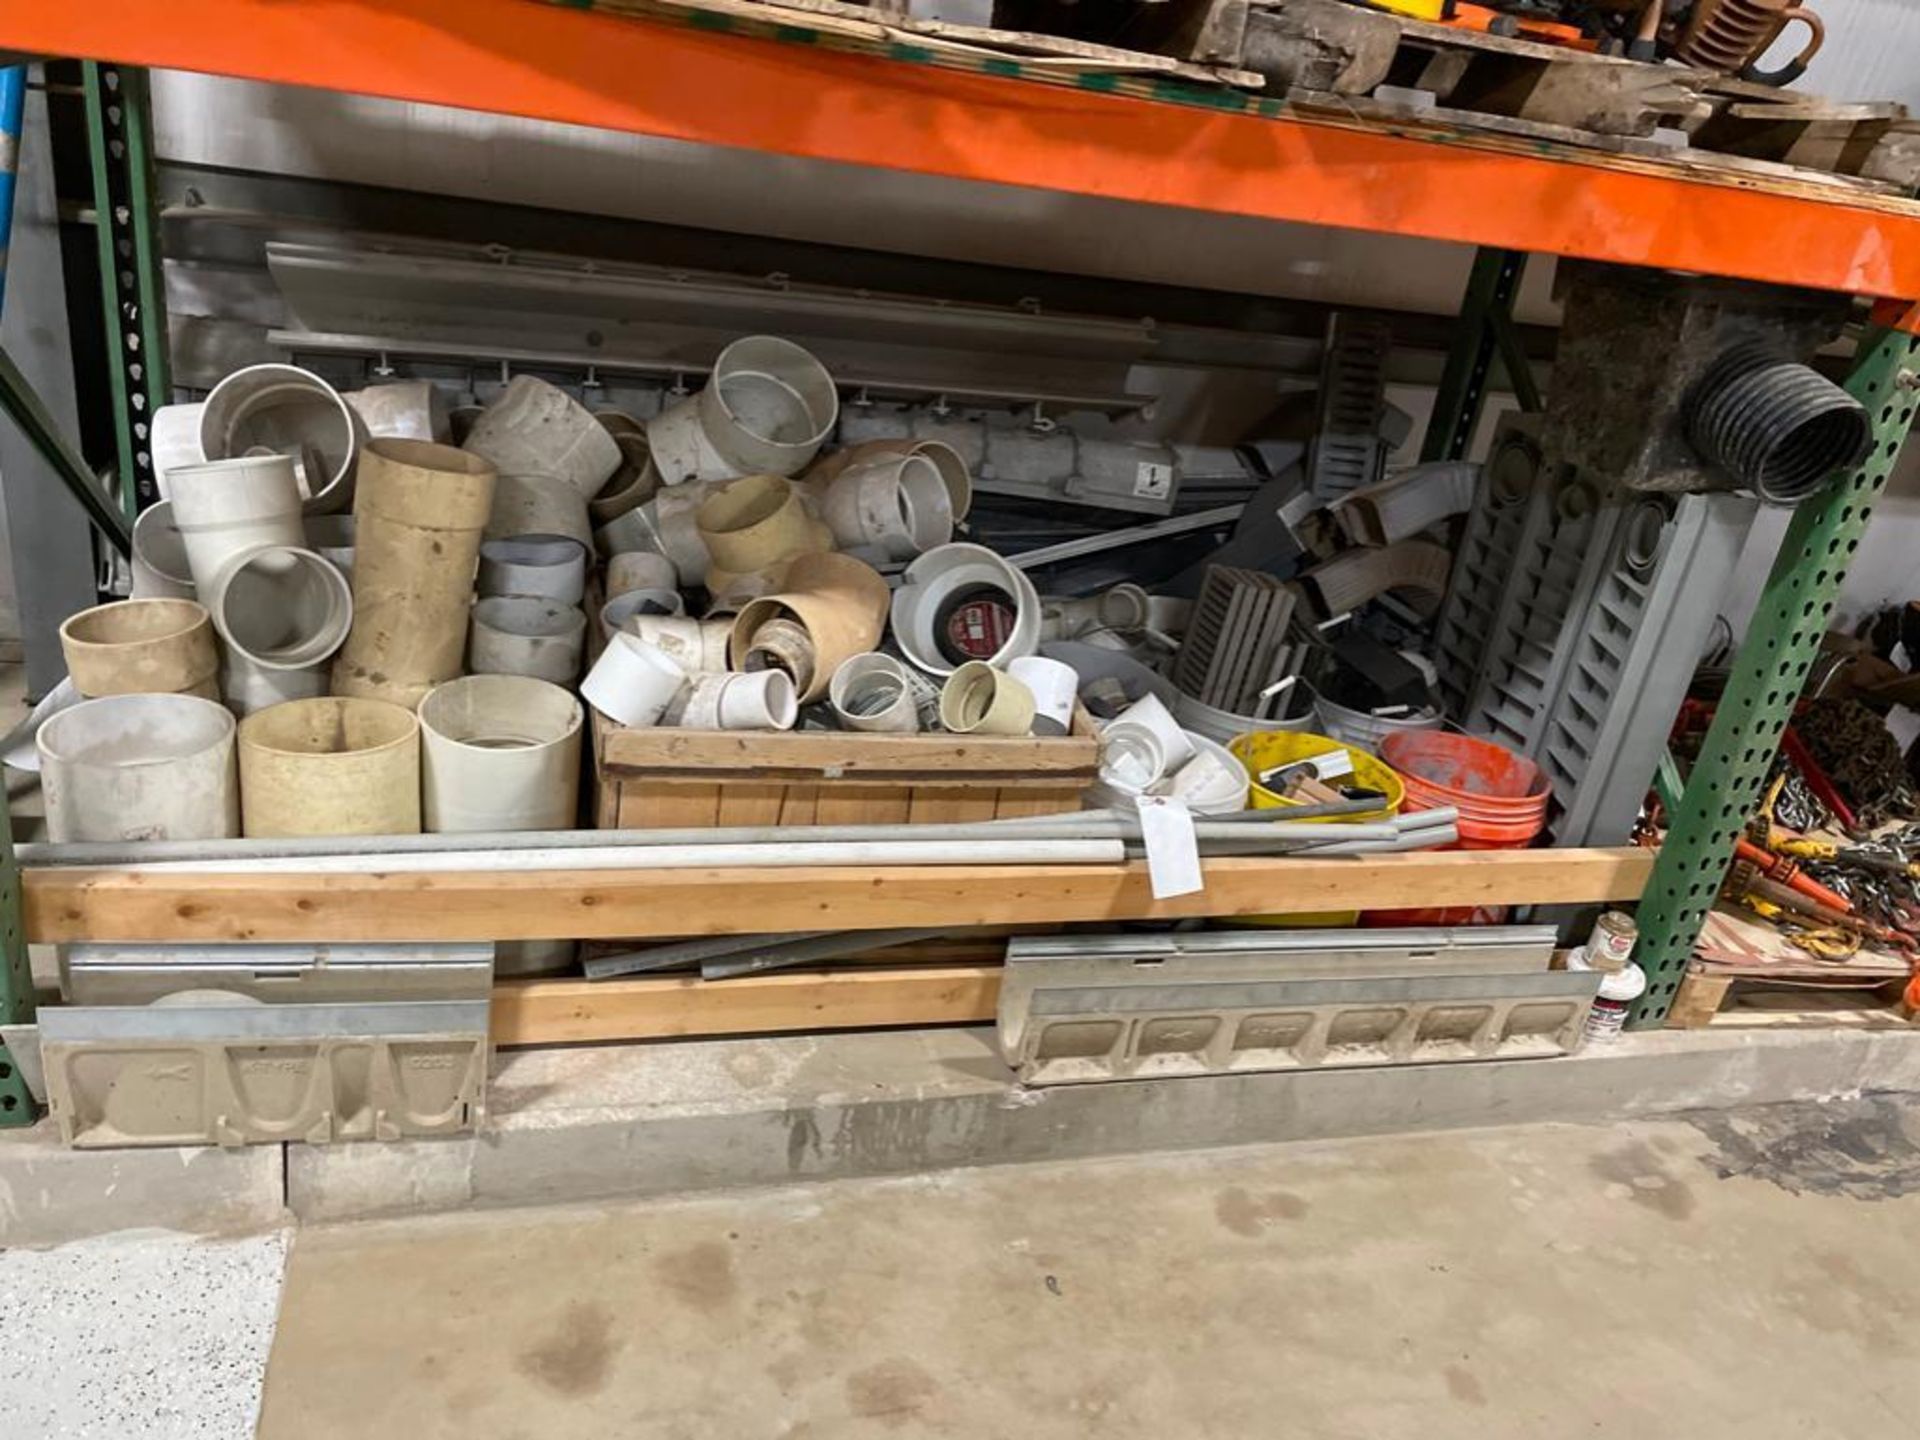 Miscellaneous Contents of Shelf, Elbows, PVC Pipe, Wire Conduit, Clamps, Gutter Elbows, Etc. Located